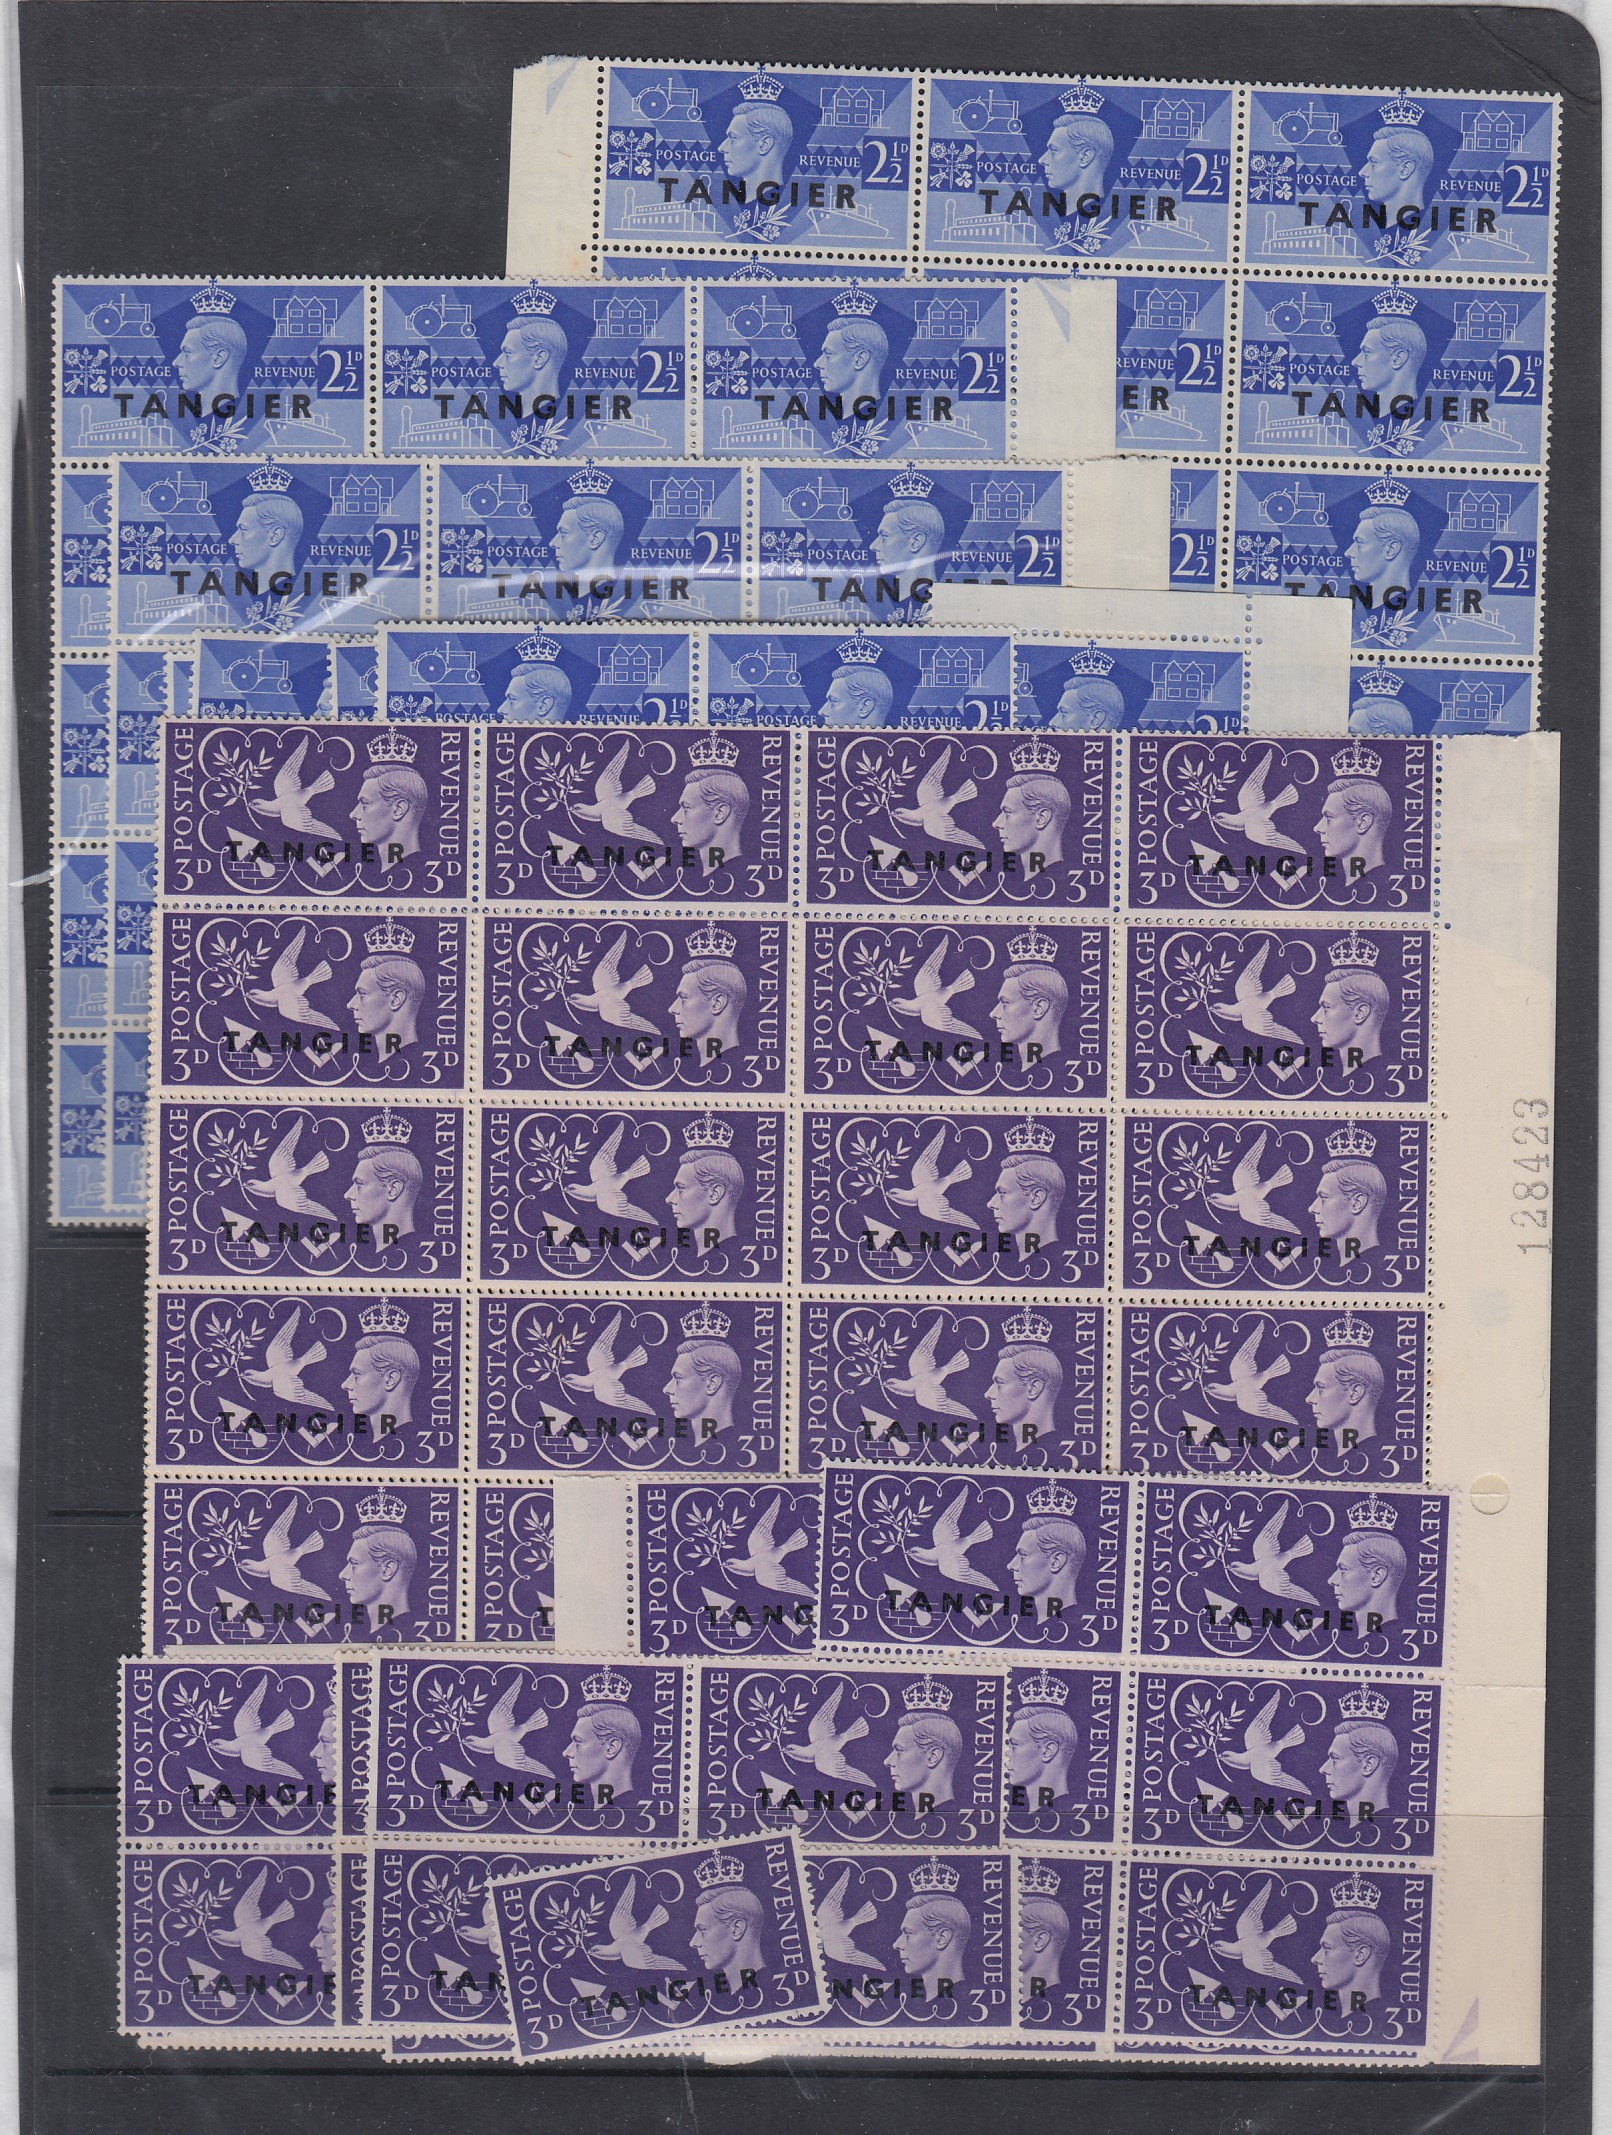 STAMPS 1946 Victory issues in part sheet